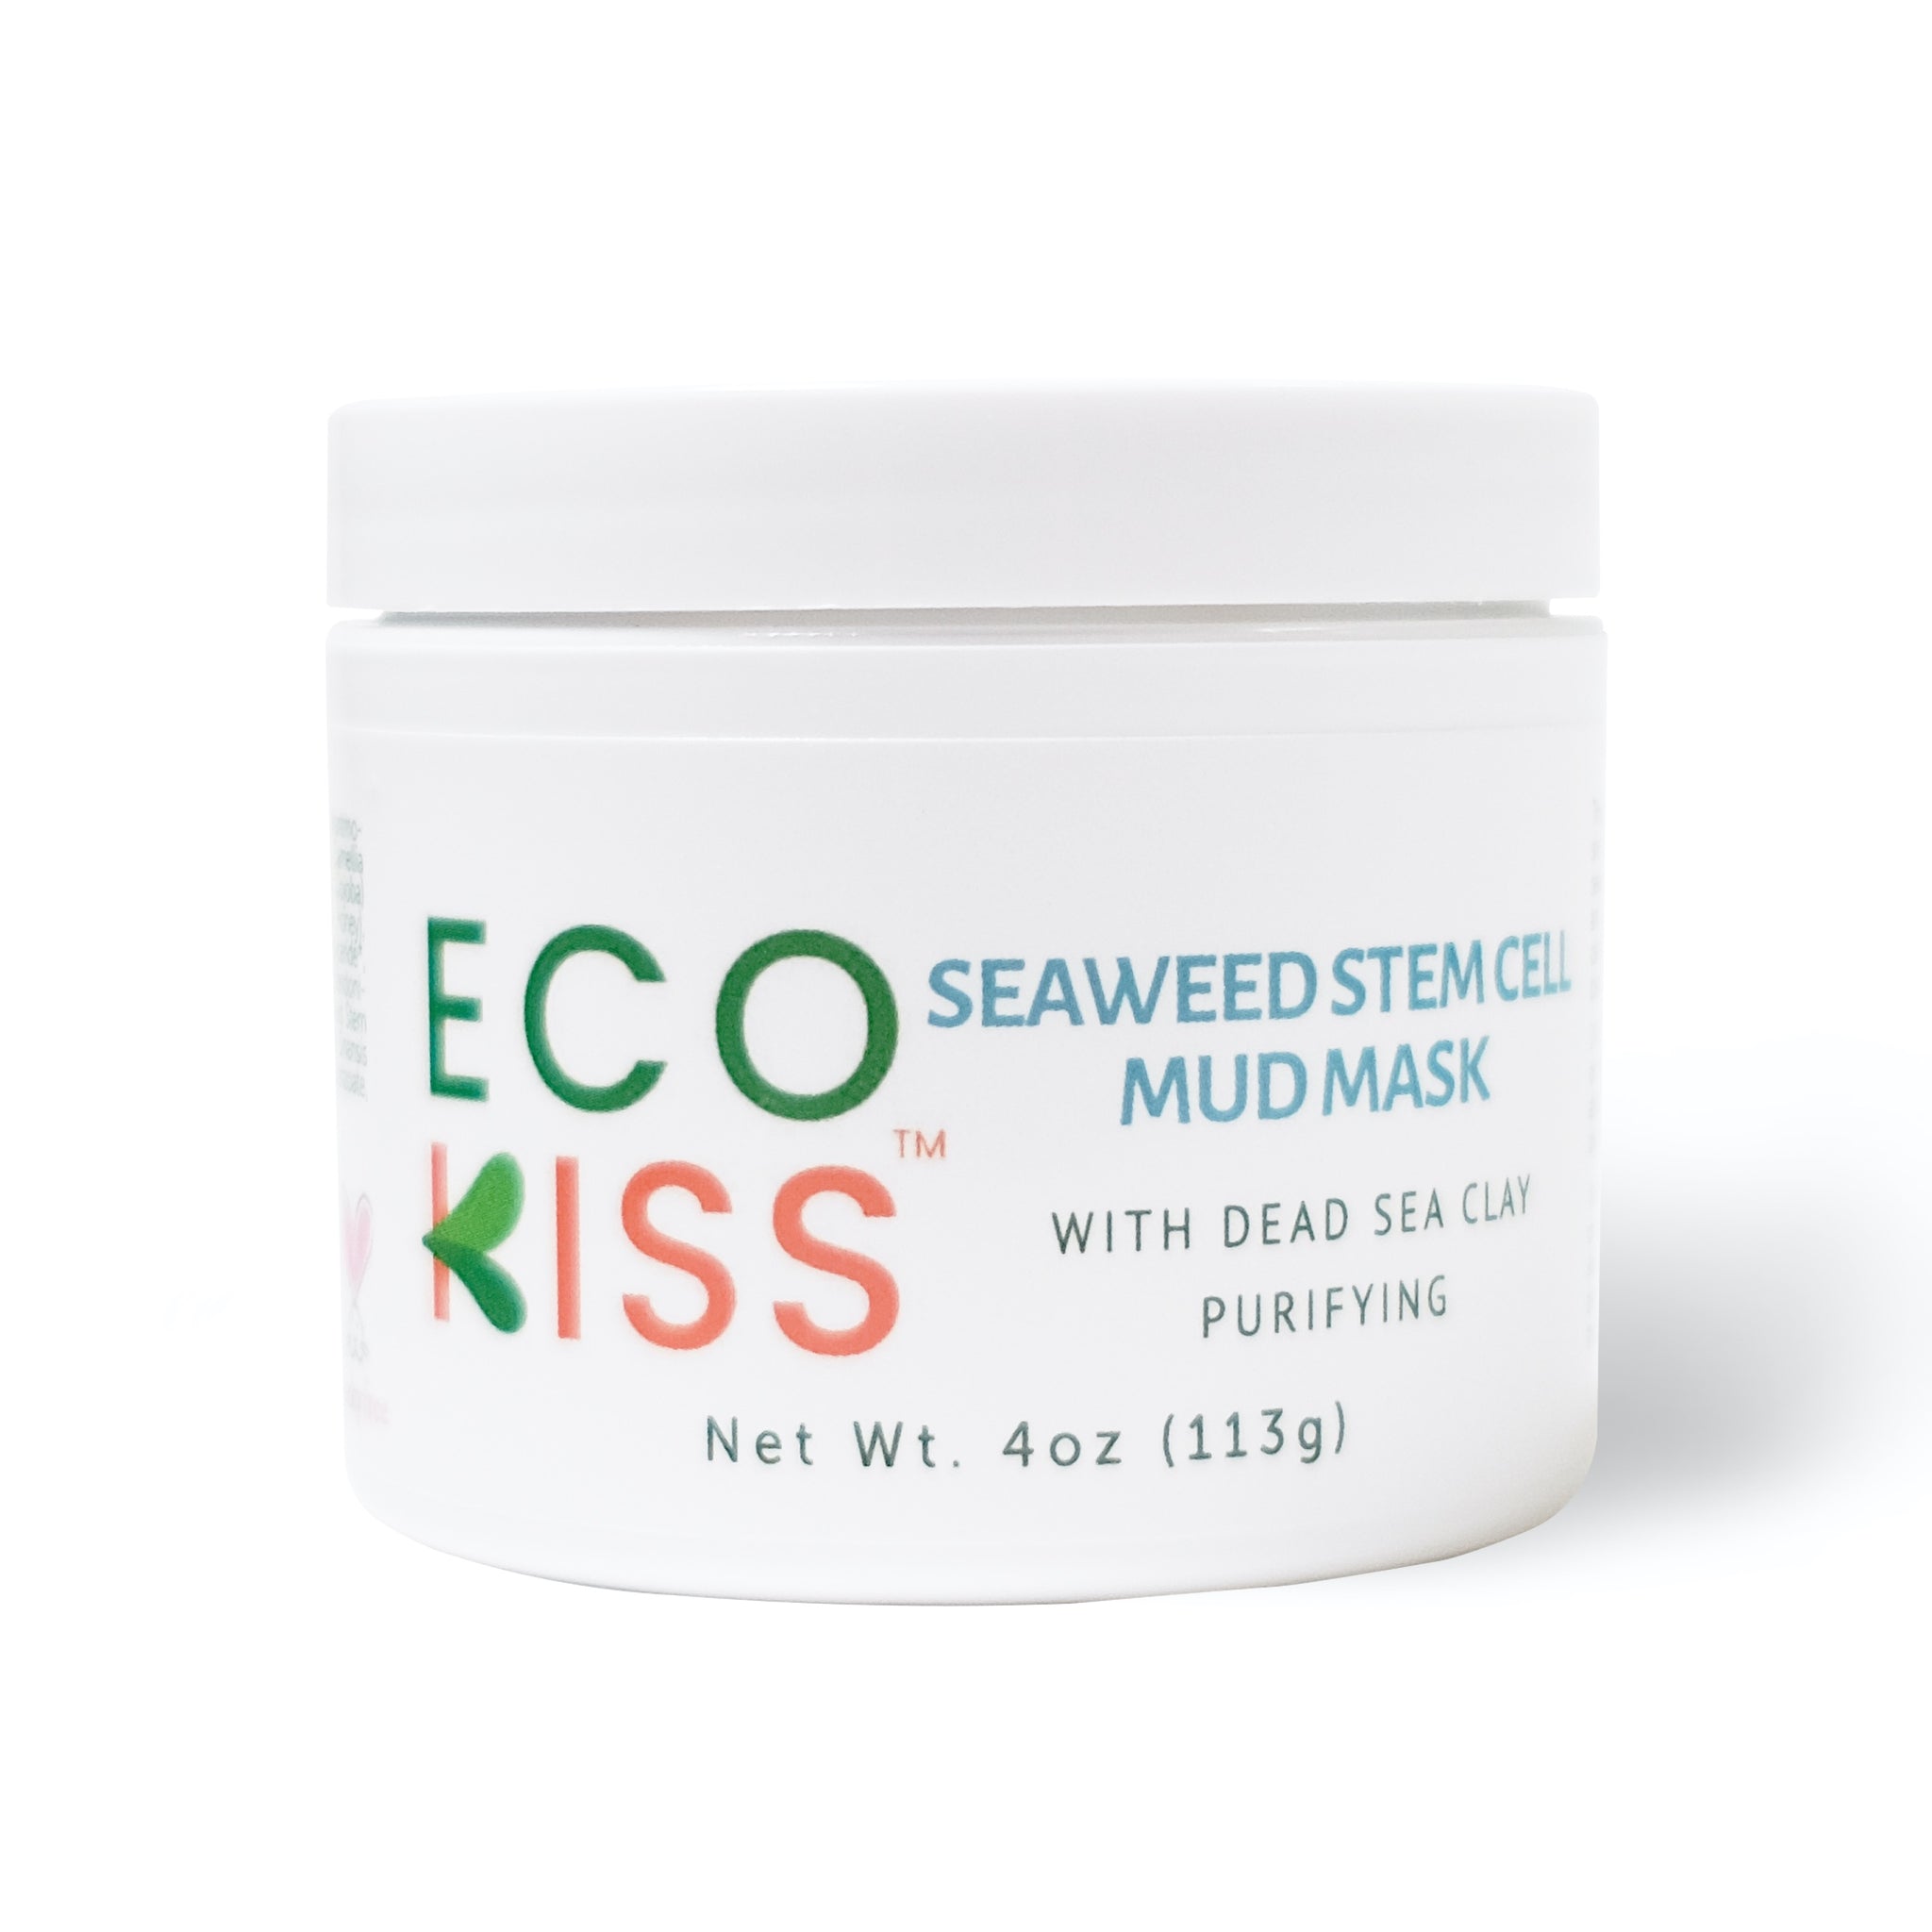 Seaweed Stem Cell Mud Mask - Ecokiss